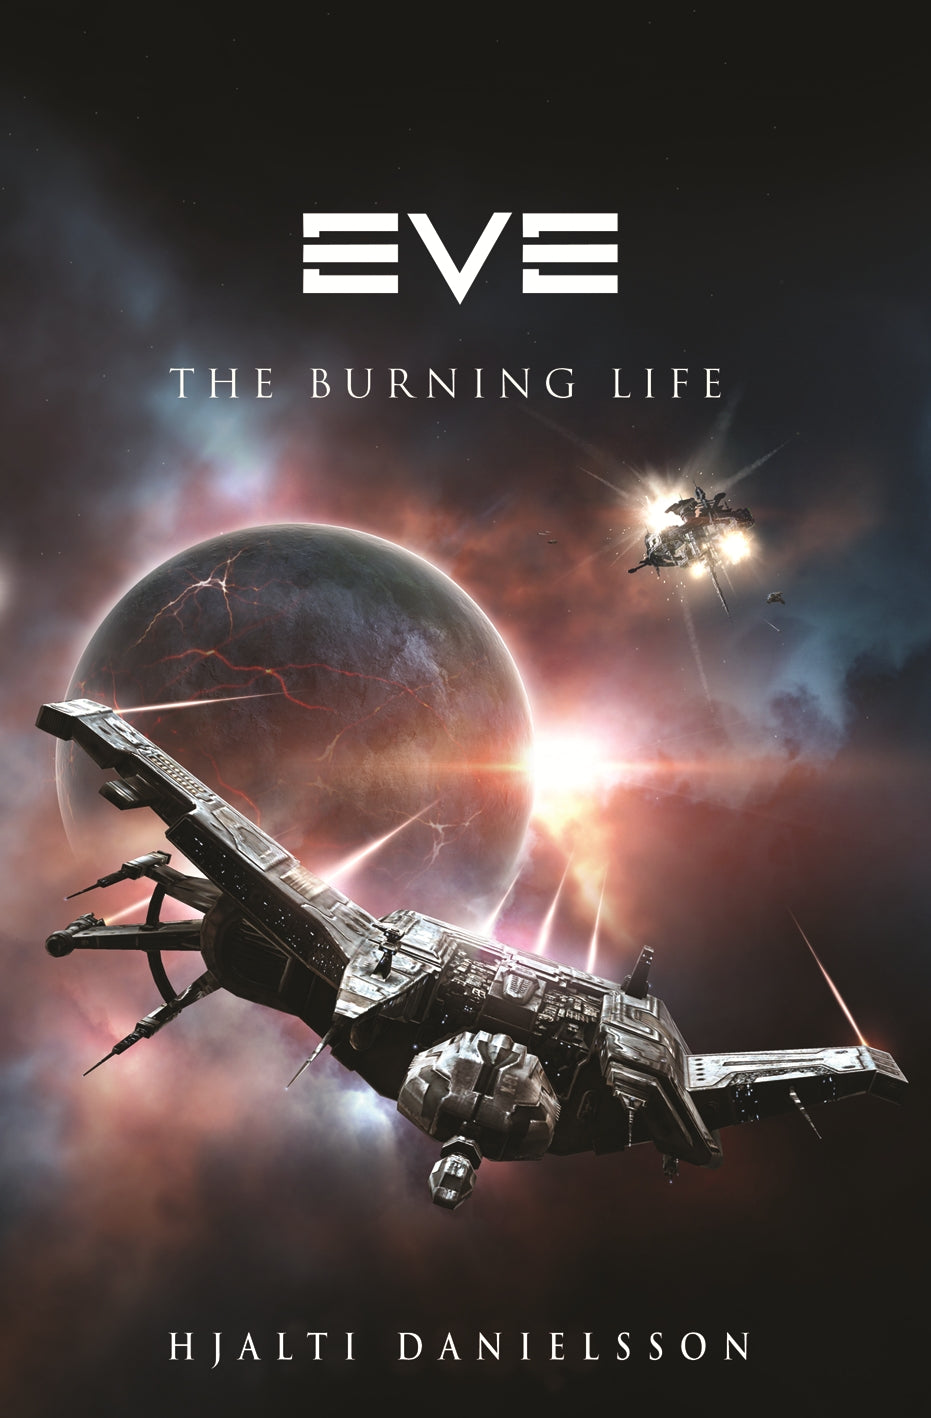 Eve: The Burning Life by Hjalti Danielsson